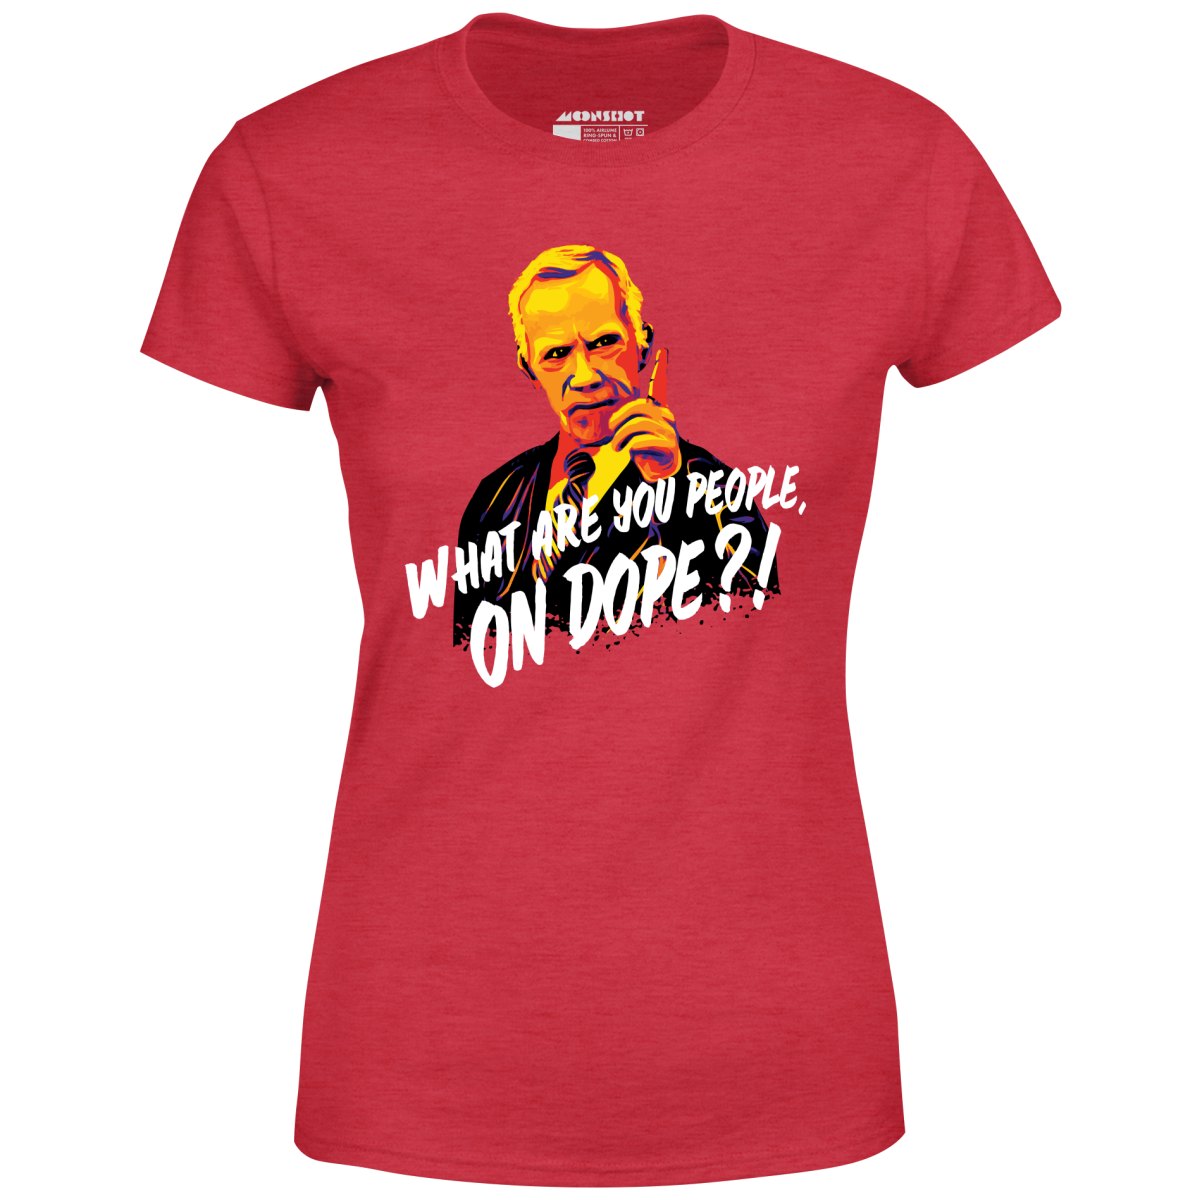 Mr. Hand - What Are You People, On Dope? - Women's T-Shirt